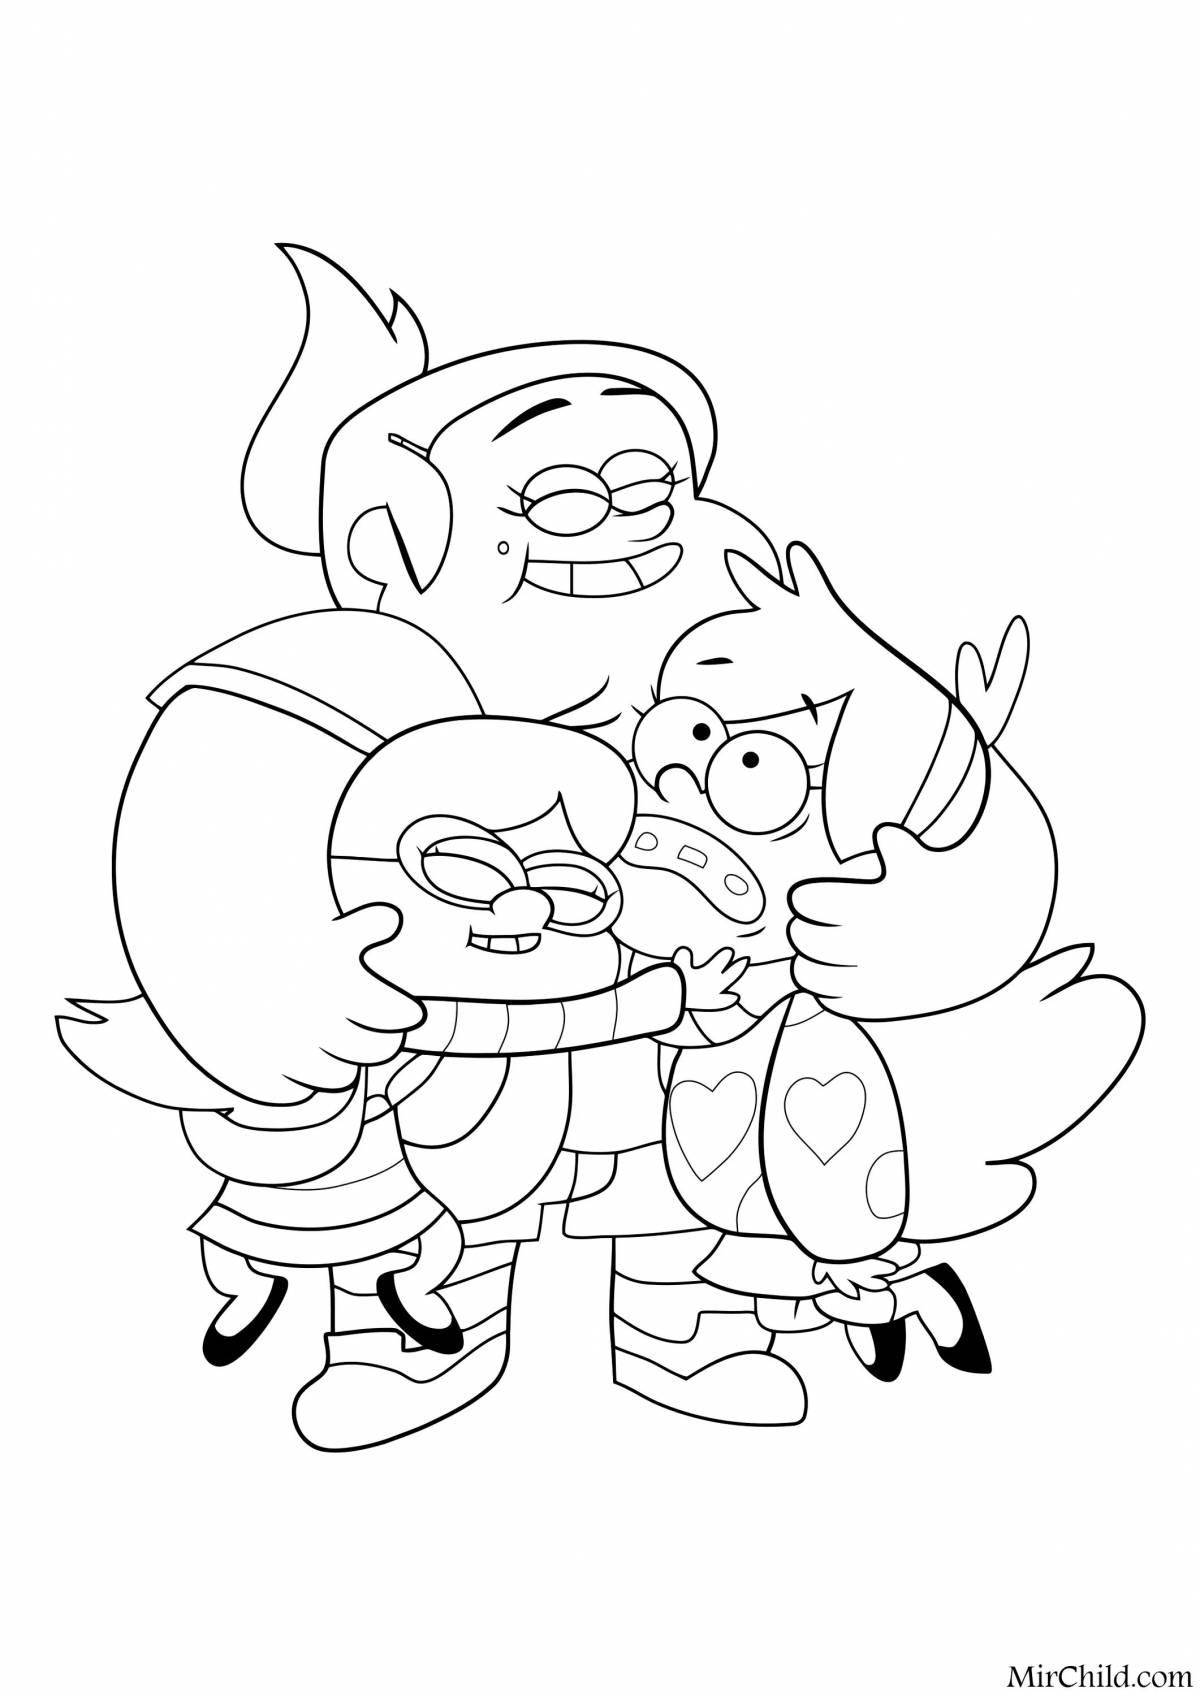 Dipper and Mabel coloring pages filled with color